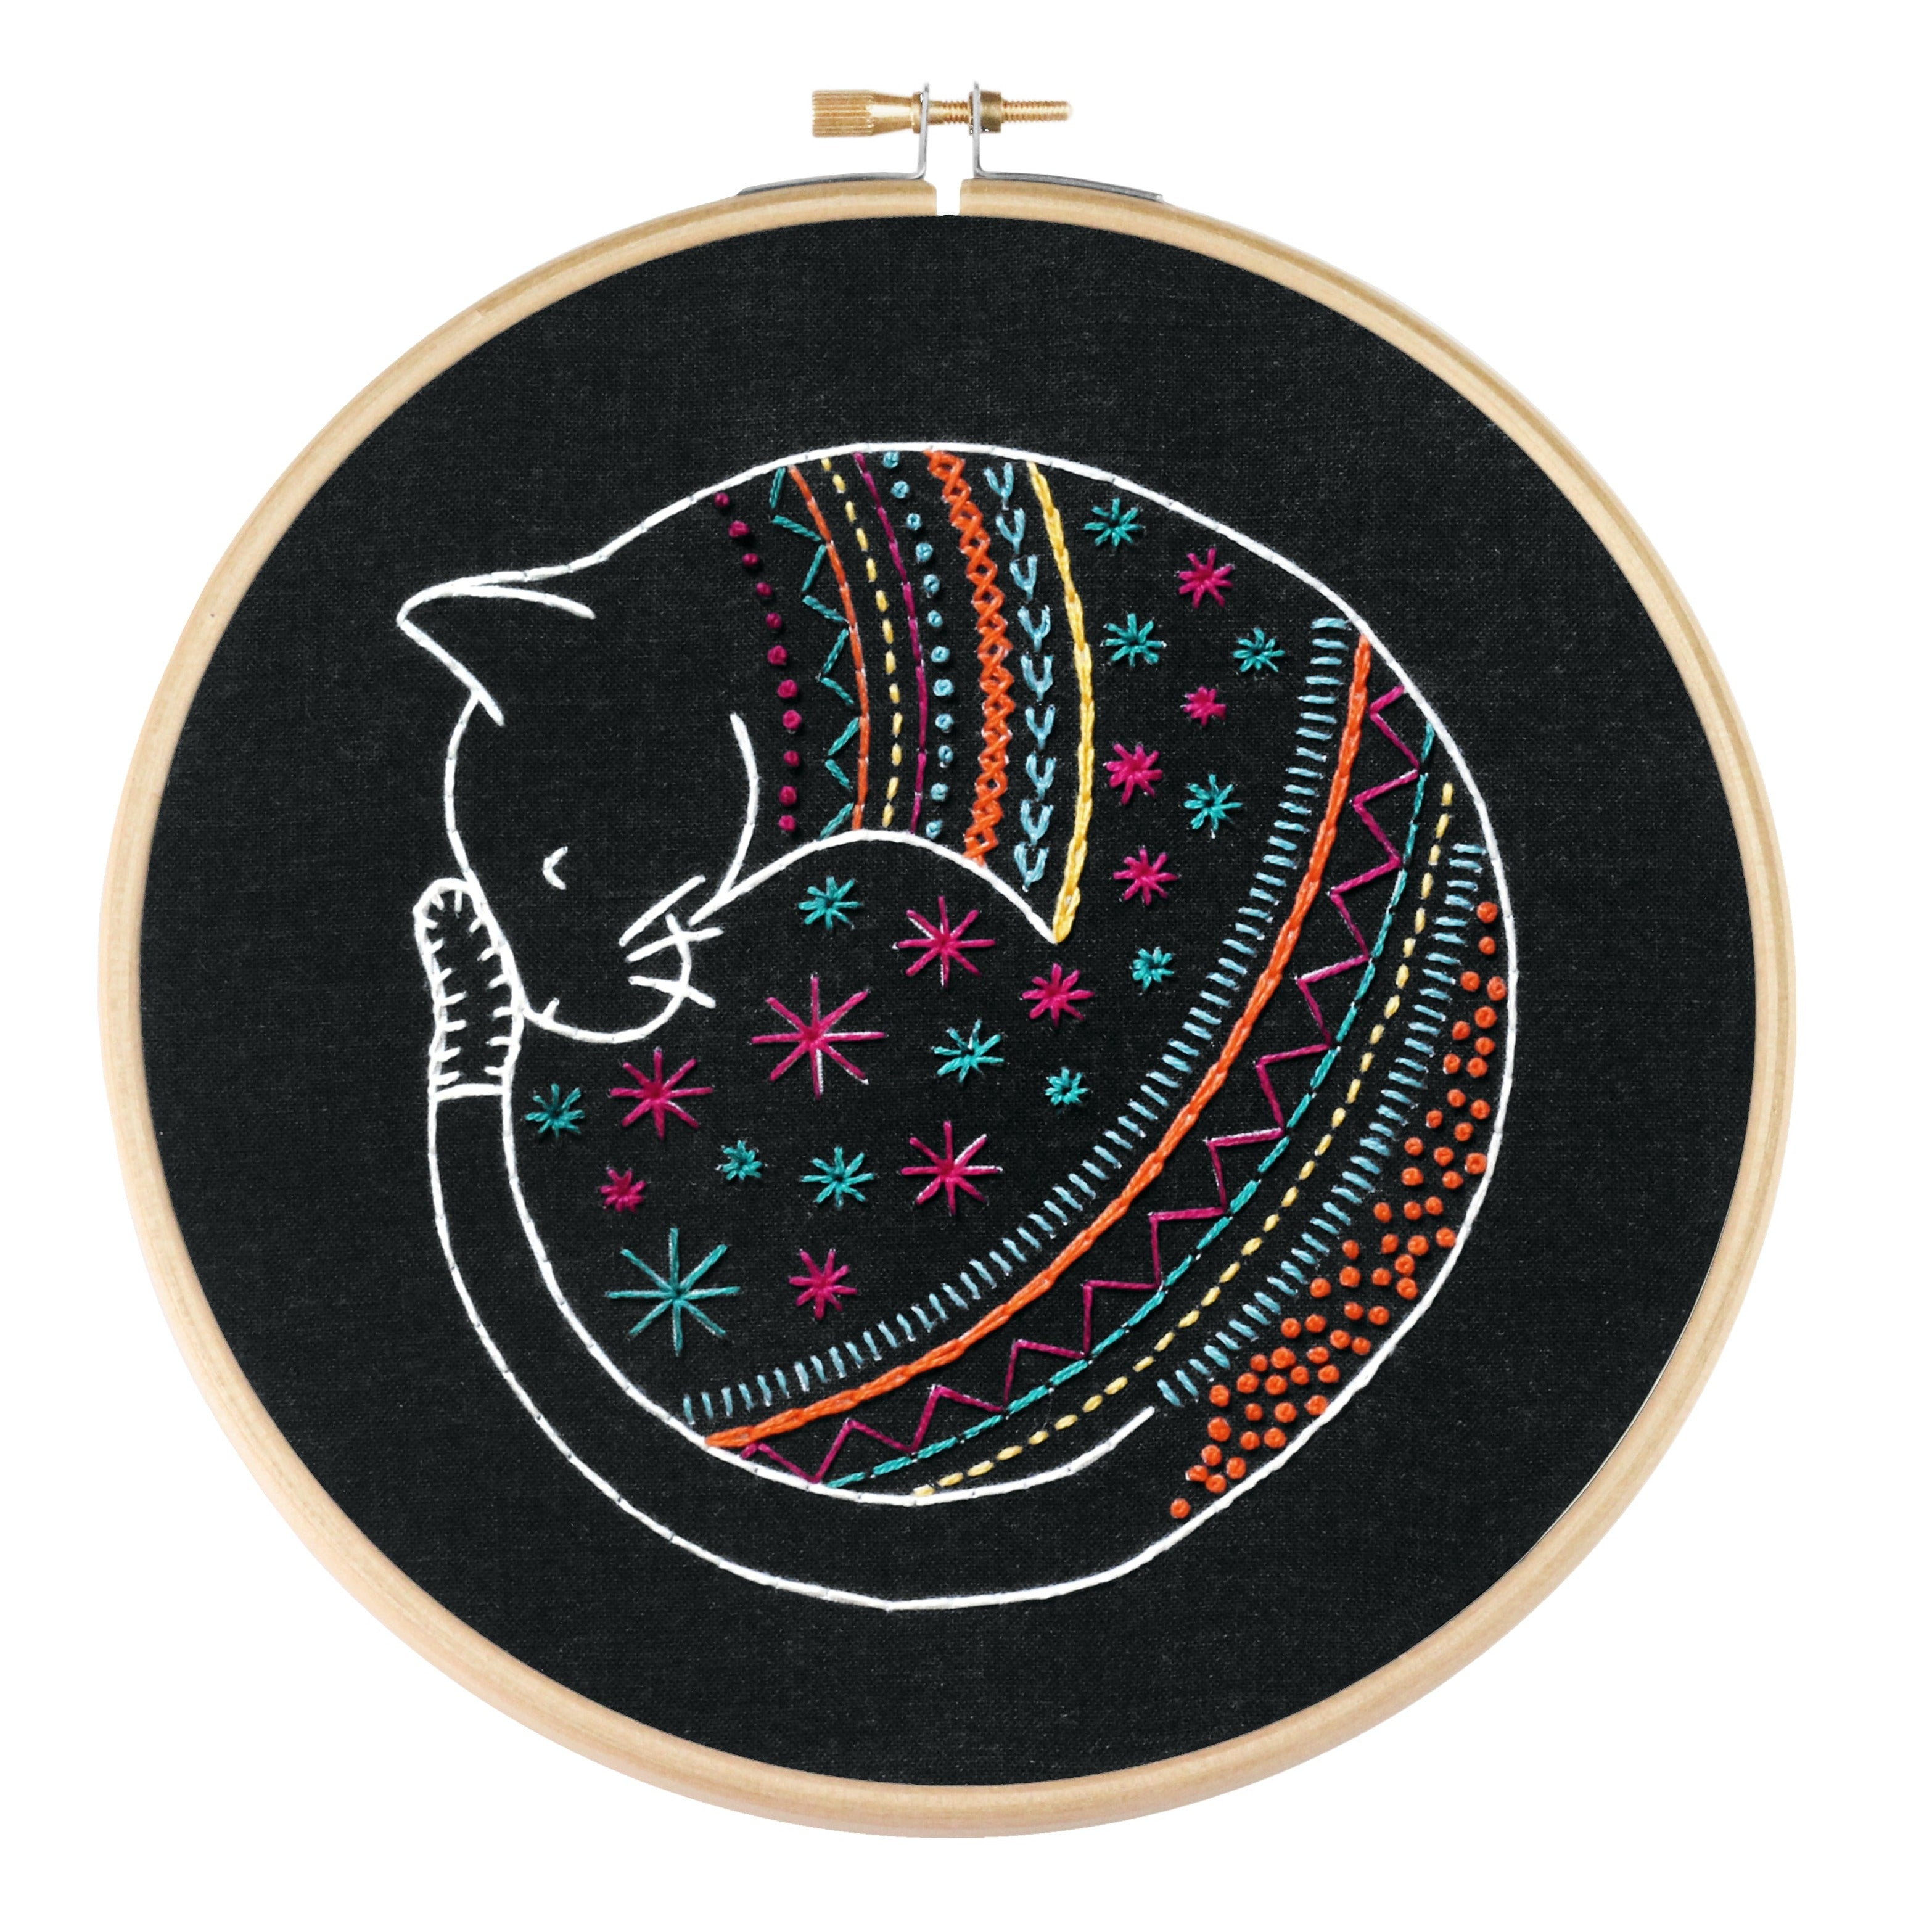 CAT EMBROIDERY KIT